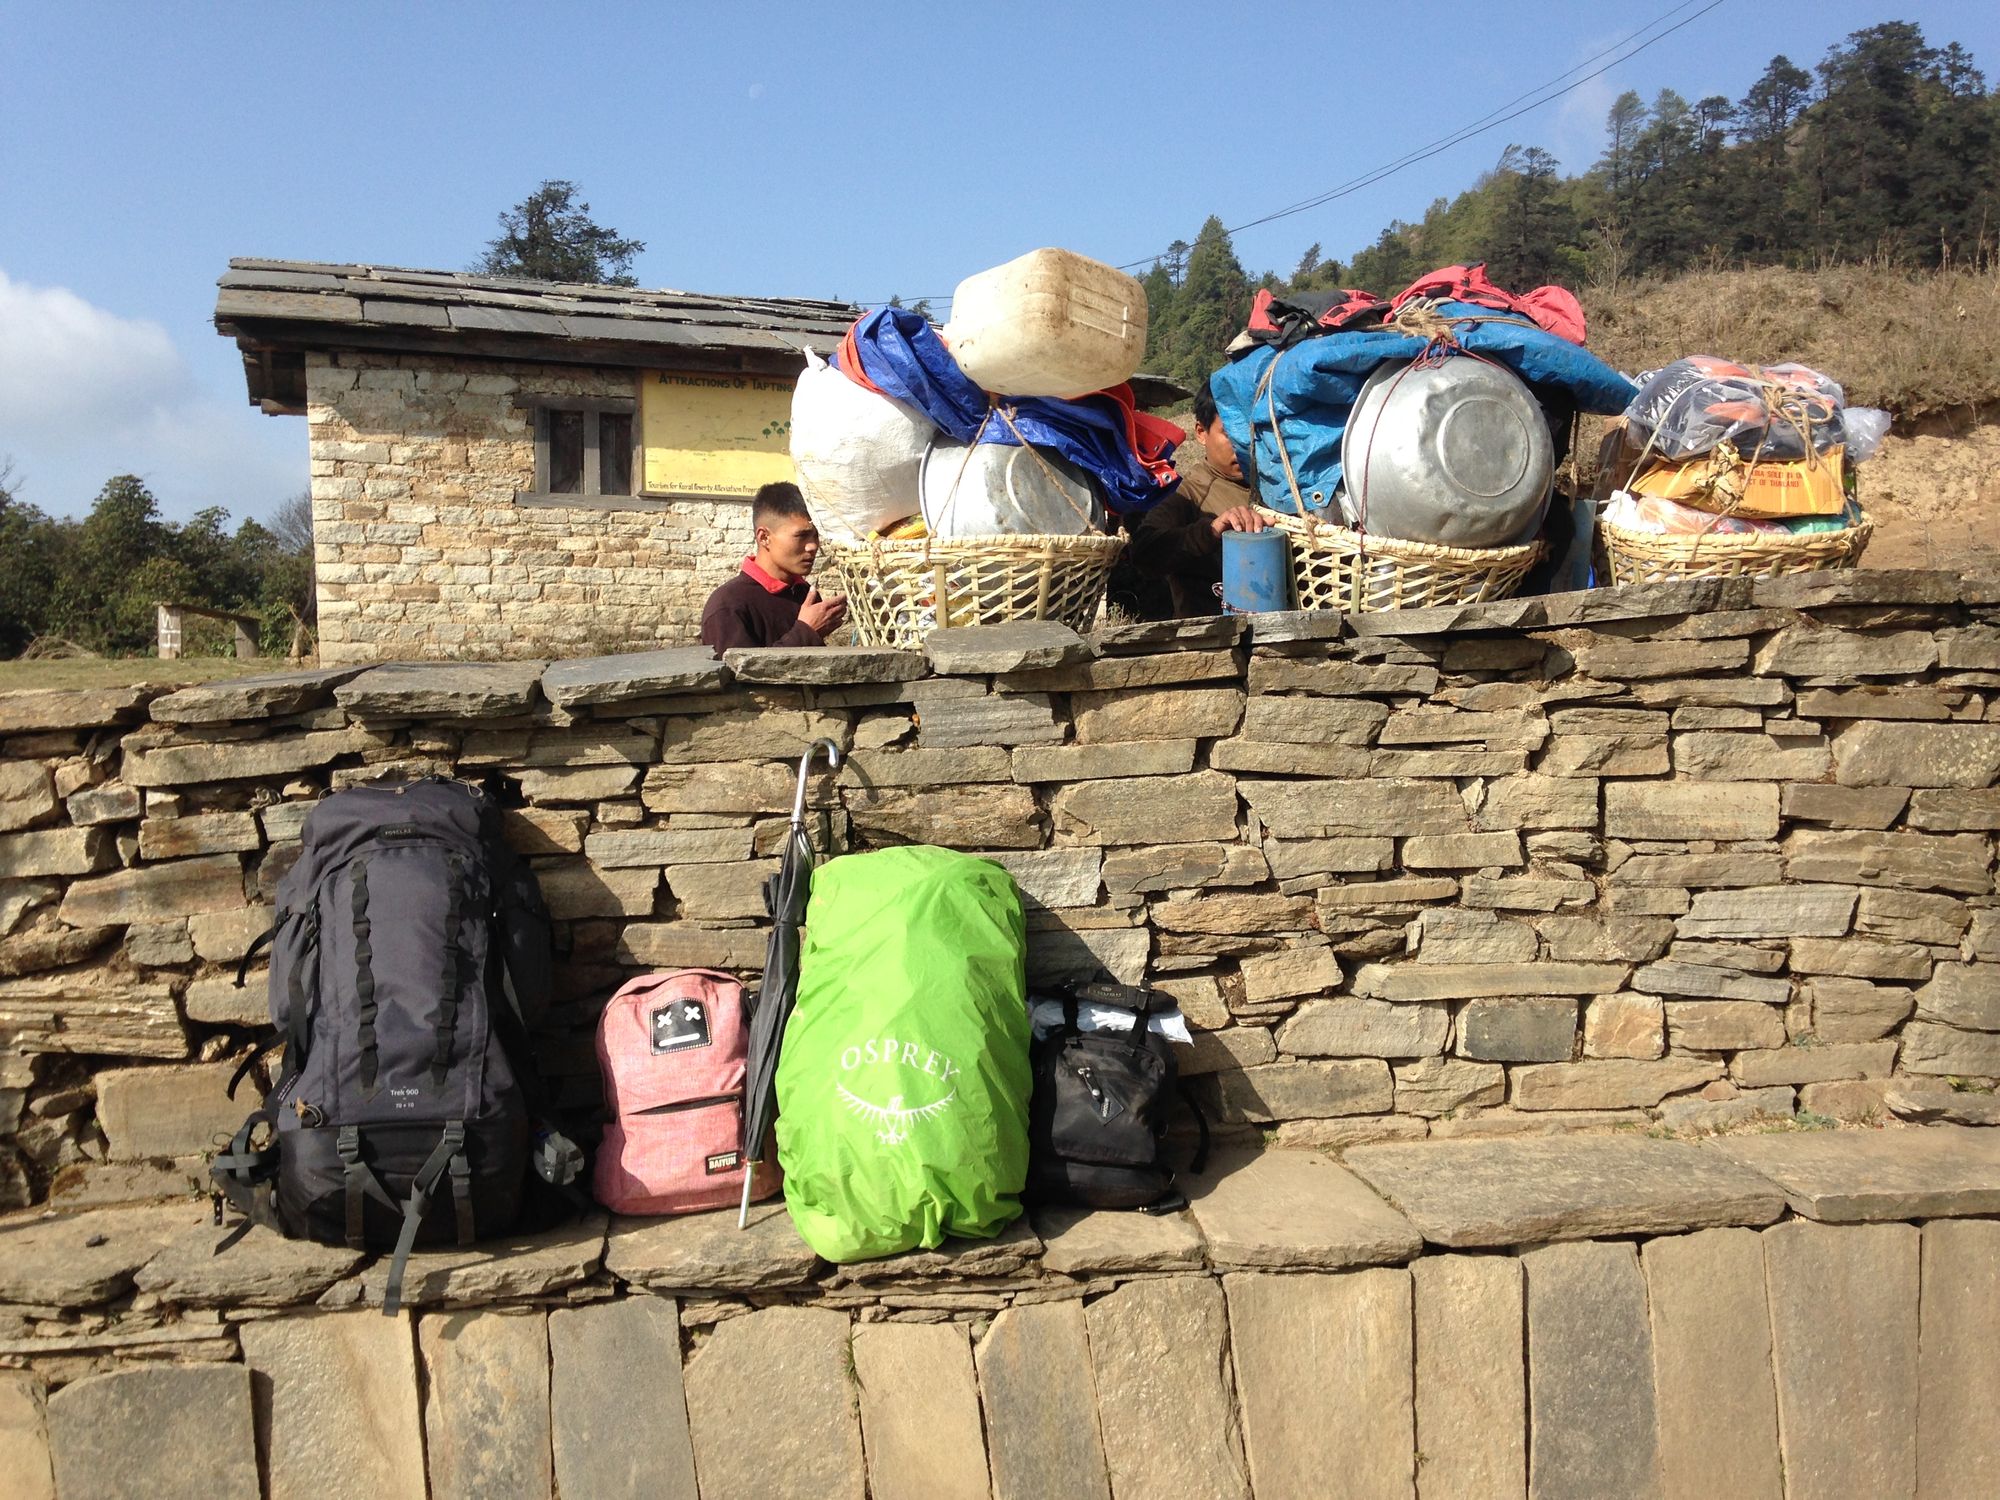 Essentials to bring to remote areas in Nepal